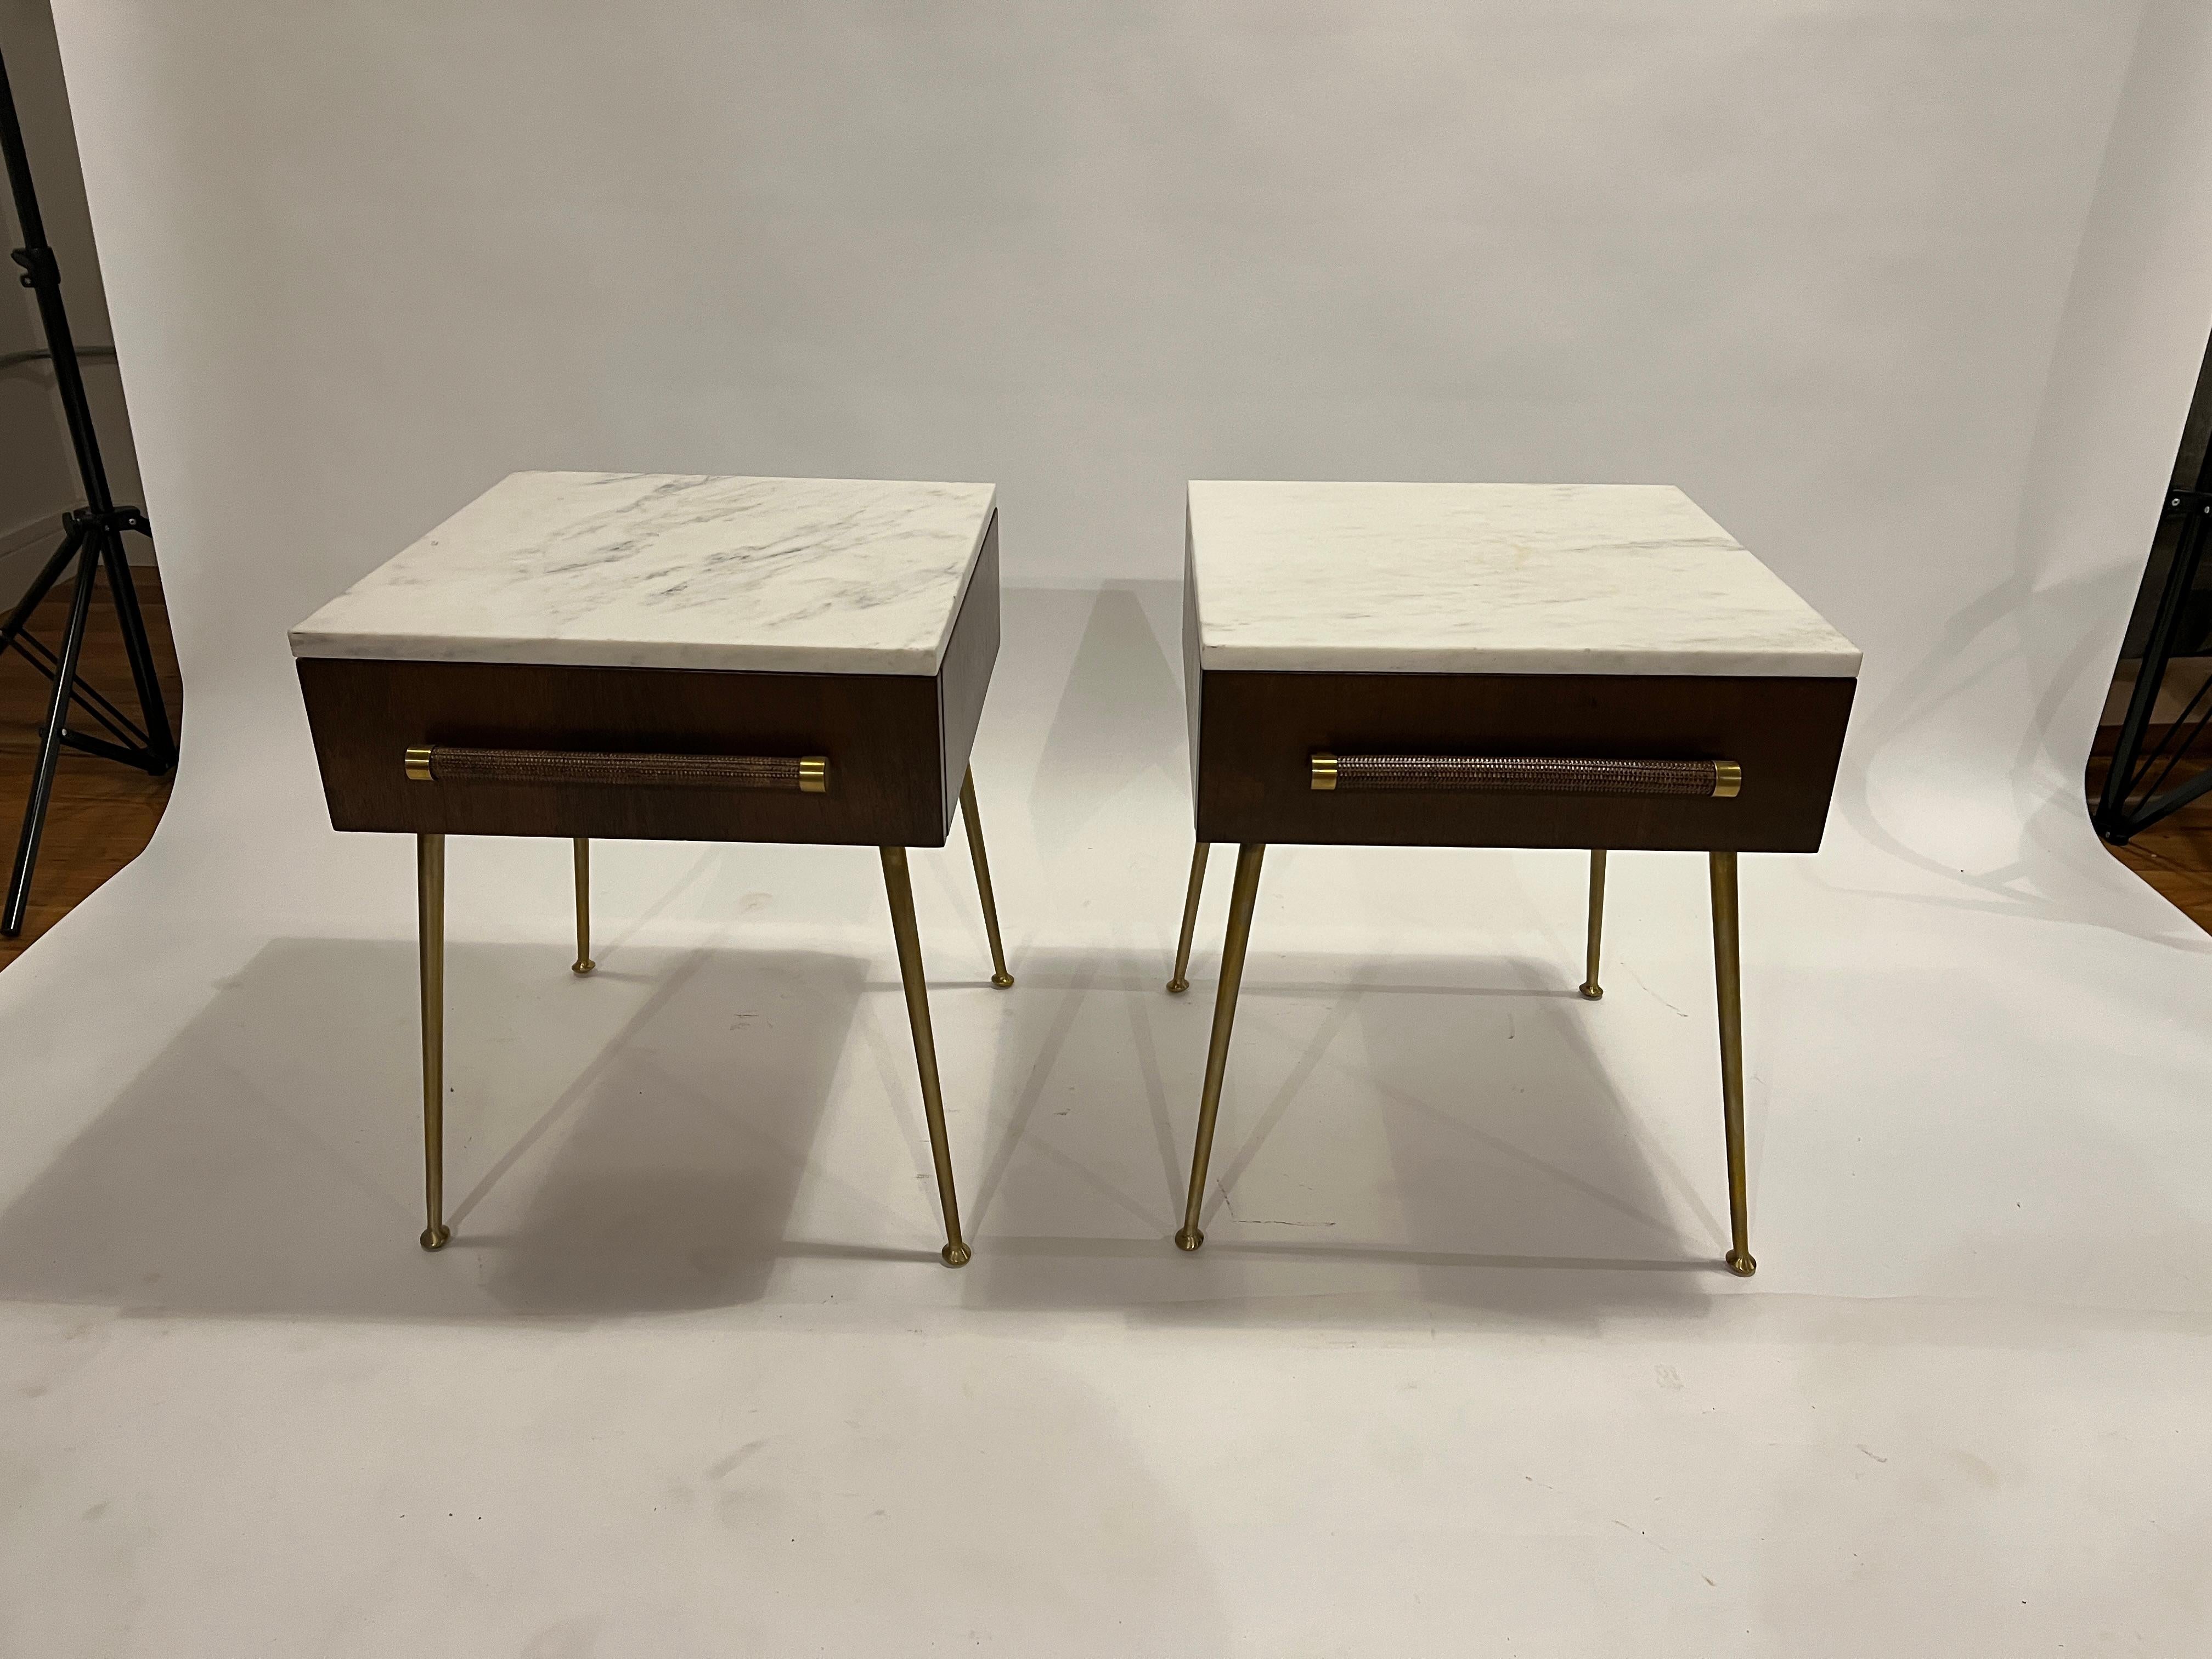 Glove box nightstands model #4001 designed by T.H. Robjohn Gibbings for Widdicomb, 1950s. Restored walnut box with a single pull-out drawer with cane and brass accent handles. Stands on brushed brass tapered legs, original label in the drawer.
These